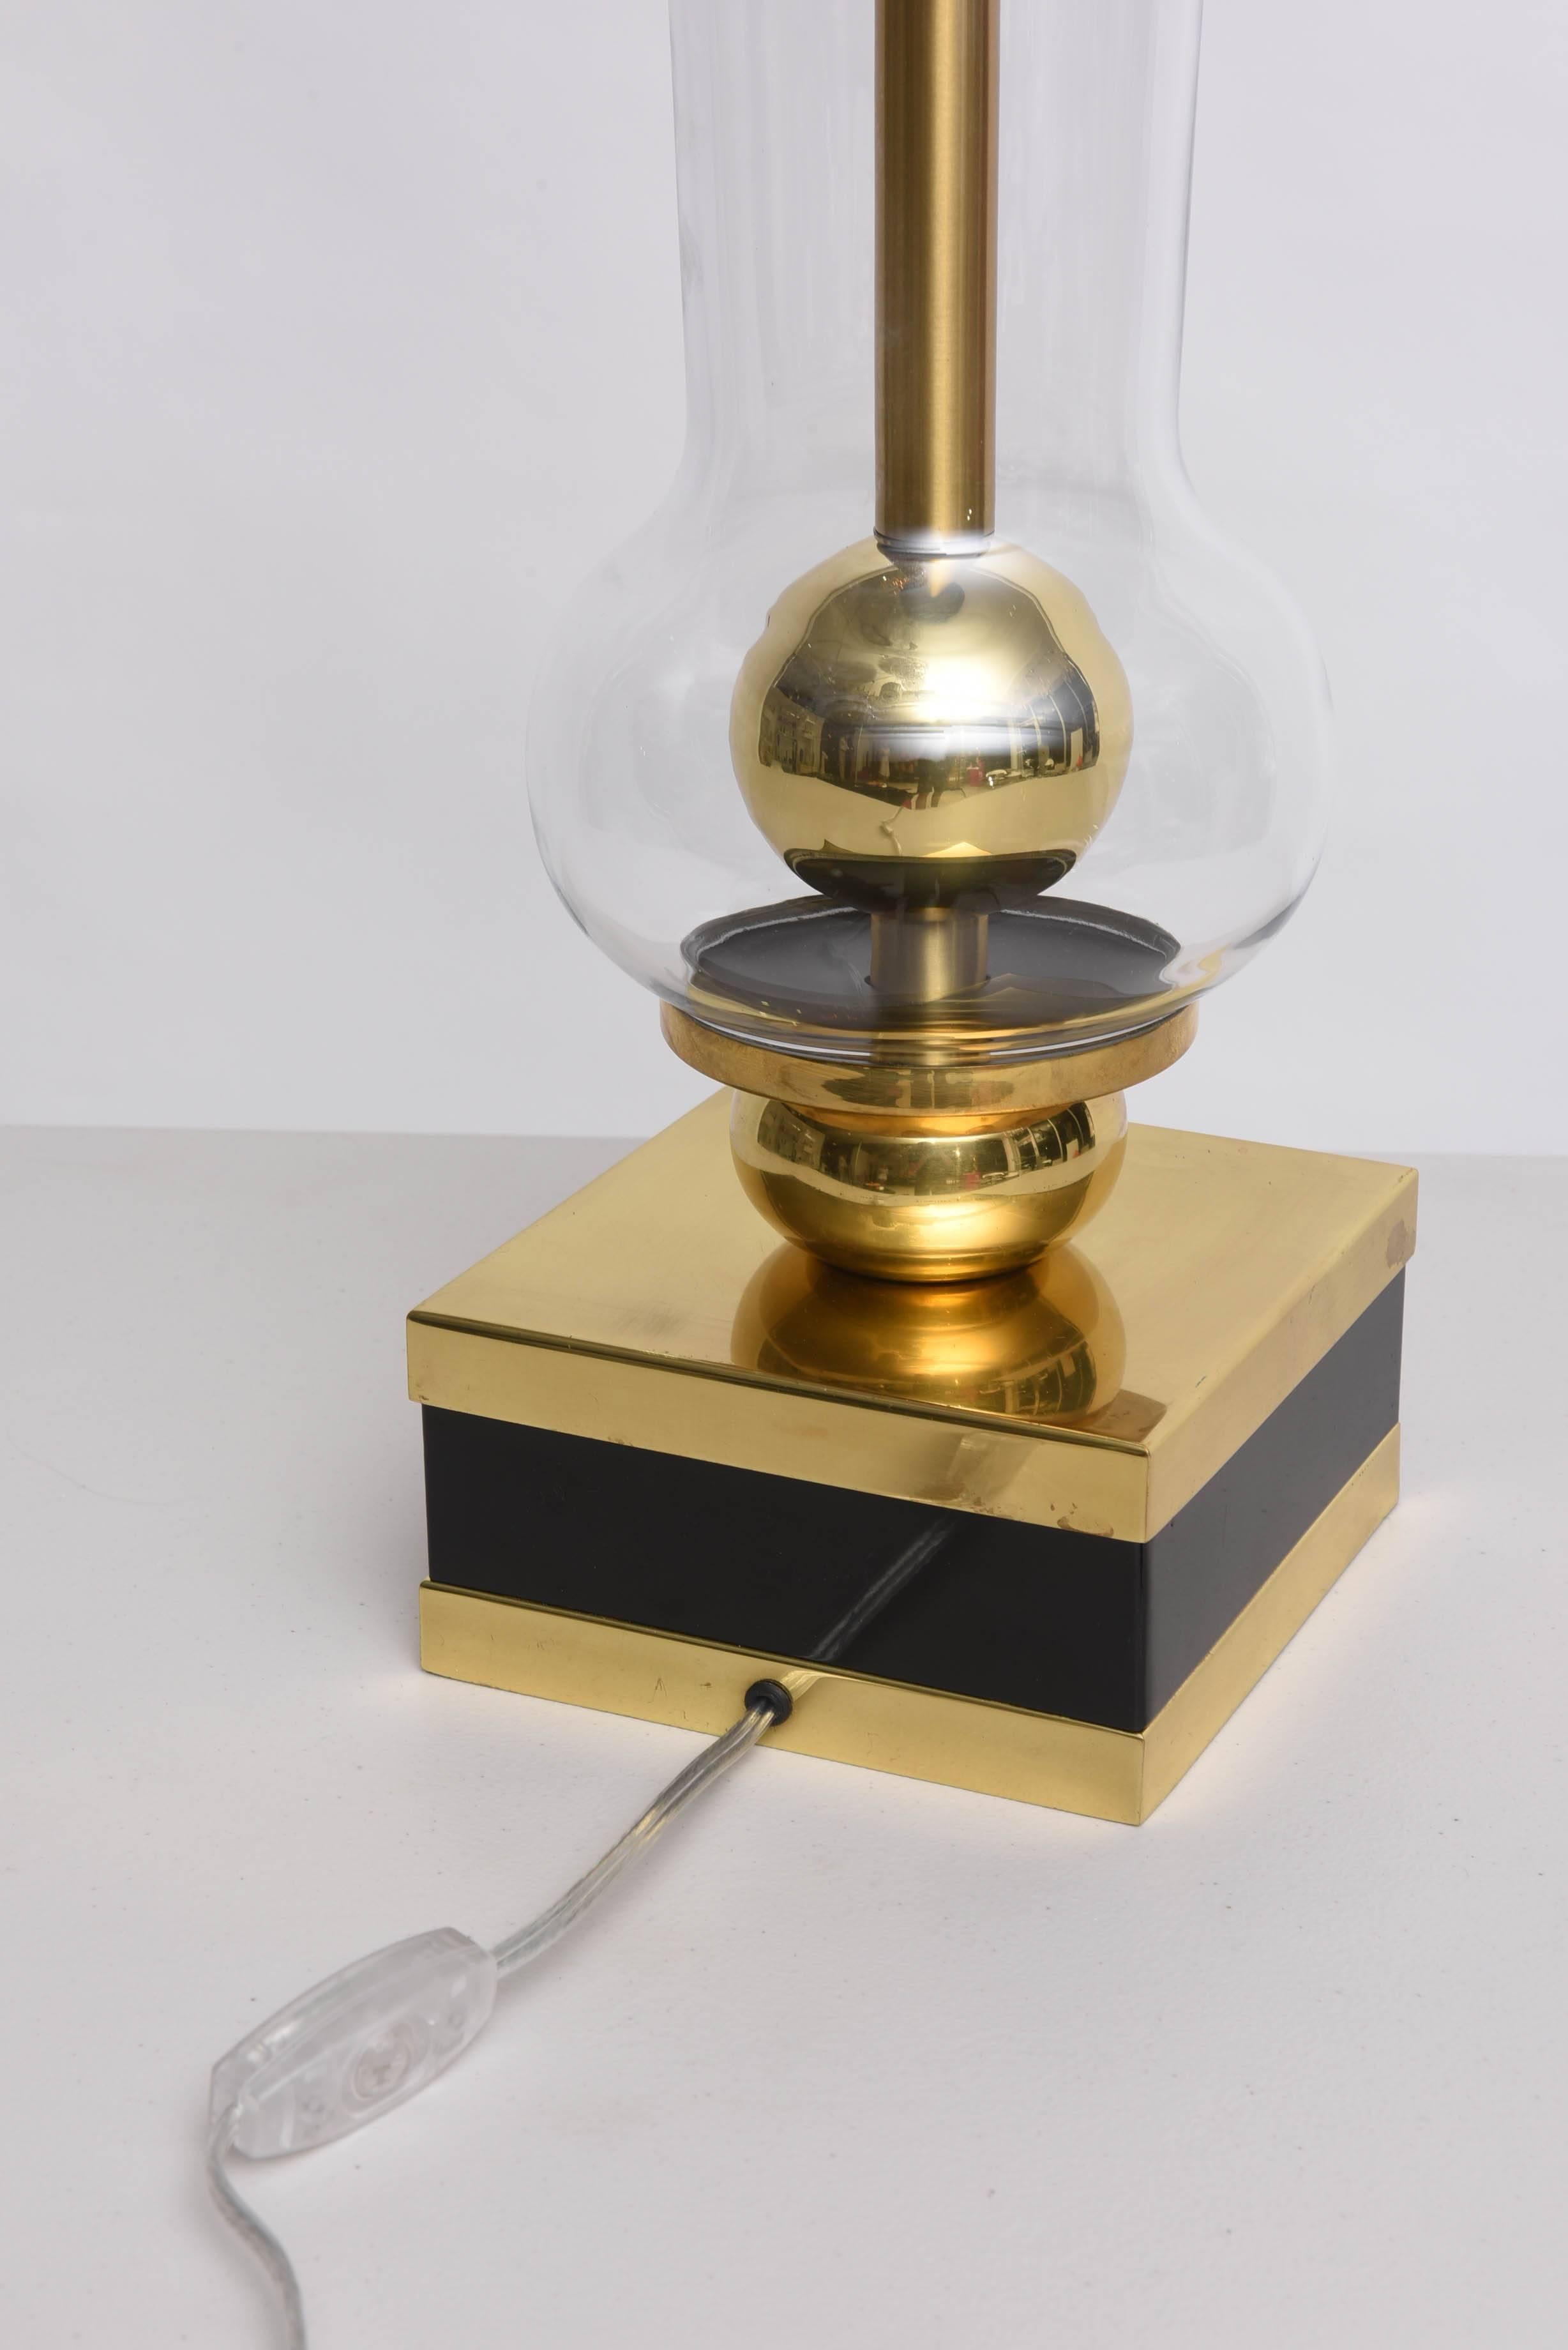 Midcentury Table Lamp, Brass and Glass, Attributed to Studio Willy Rizzo 1